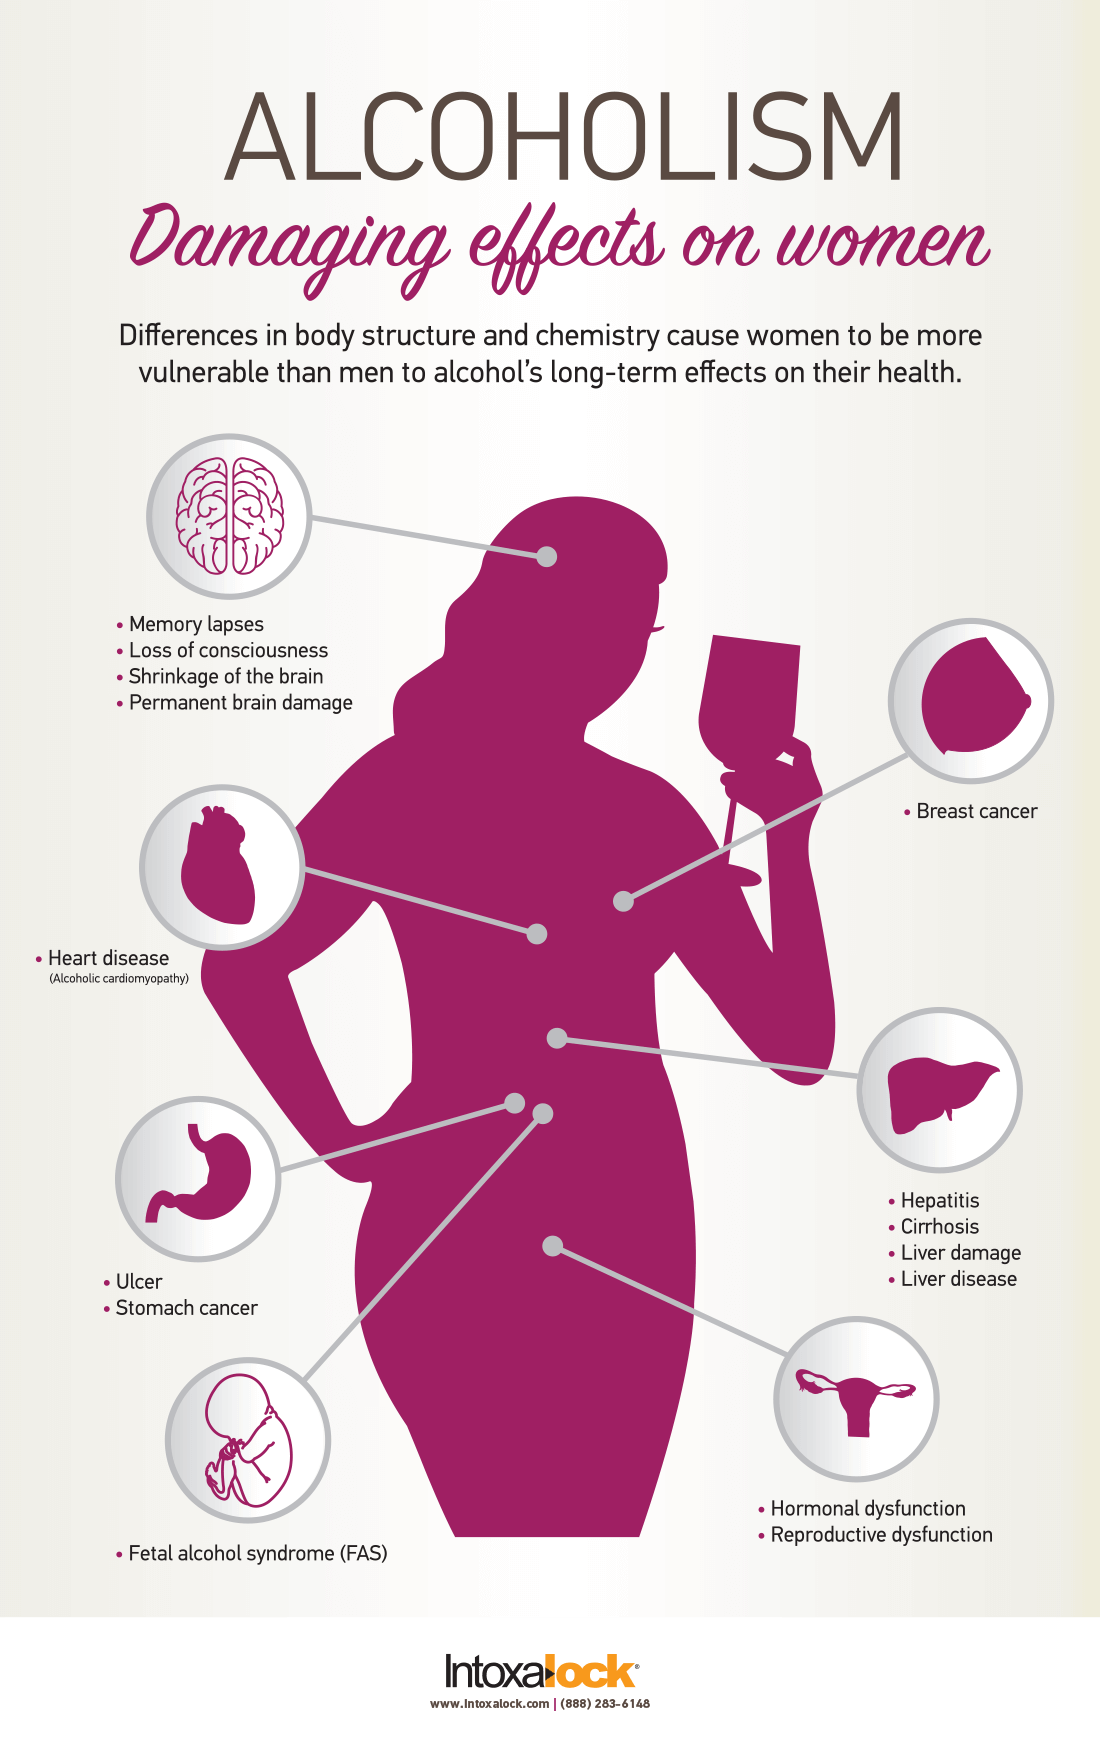 Alcoholism: Damaging effects on women infographic